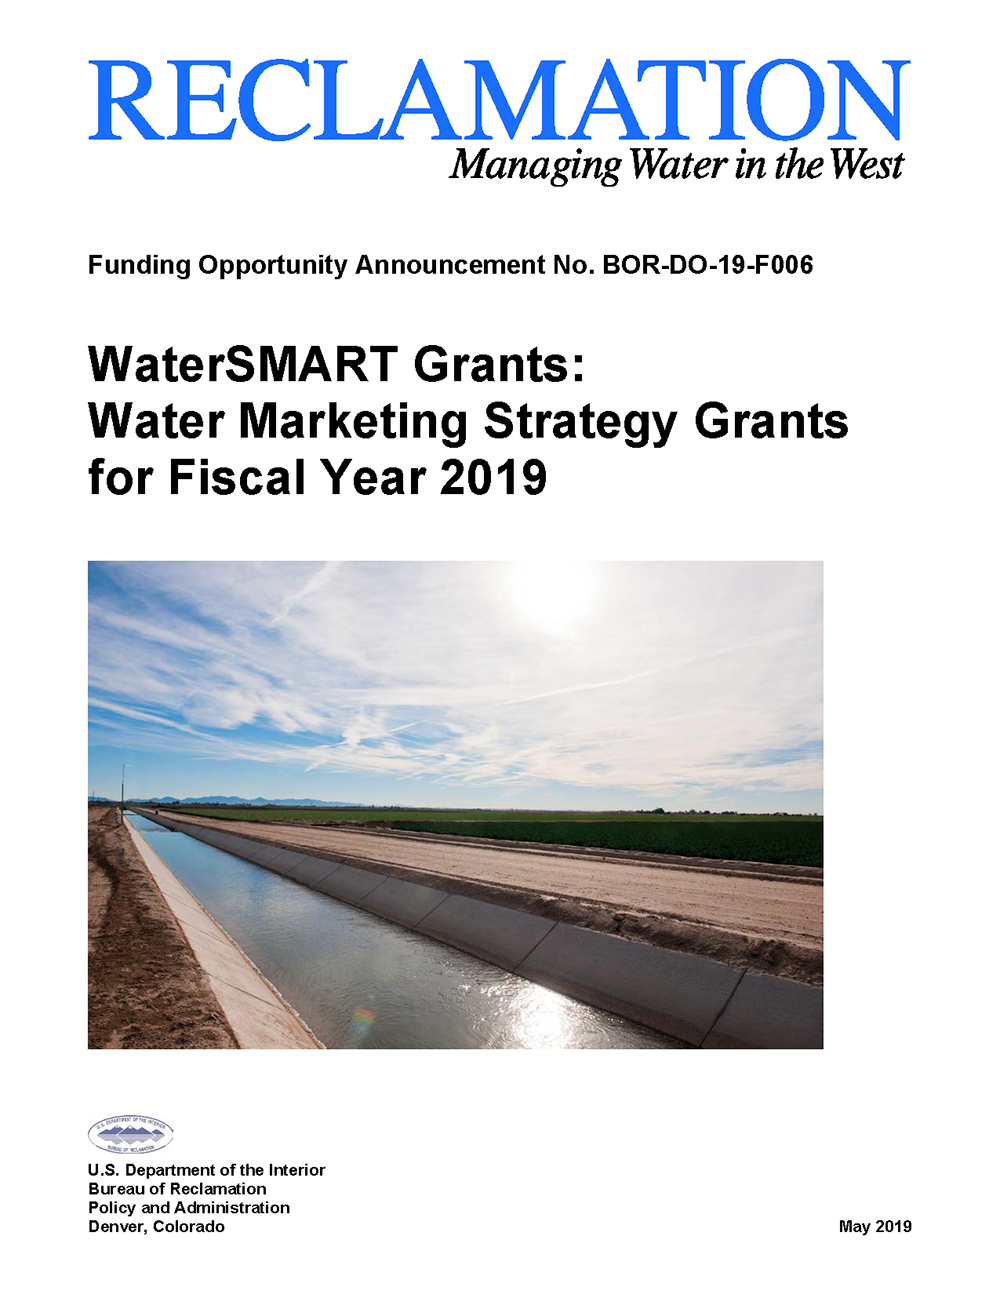 2019 Water Marketing Funding Opportunity